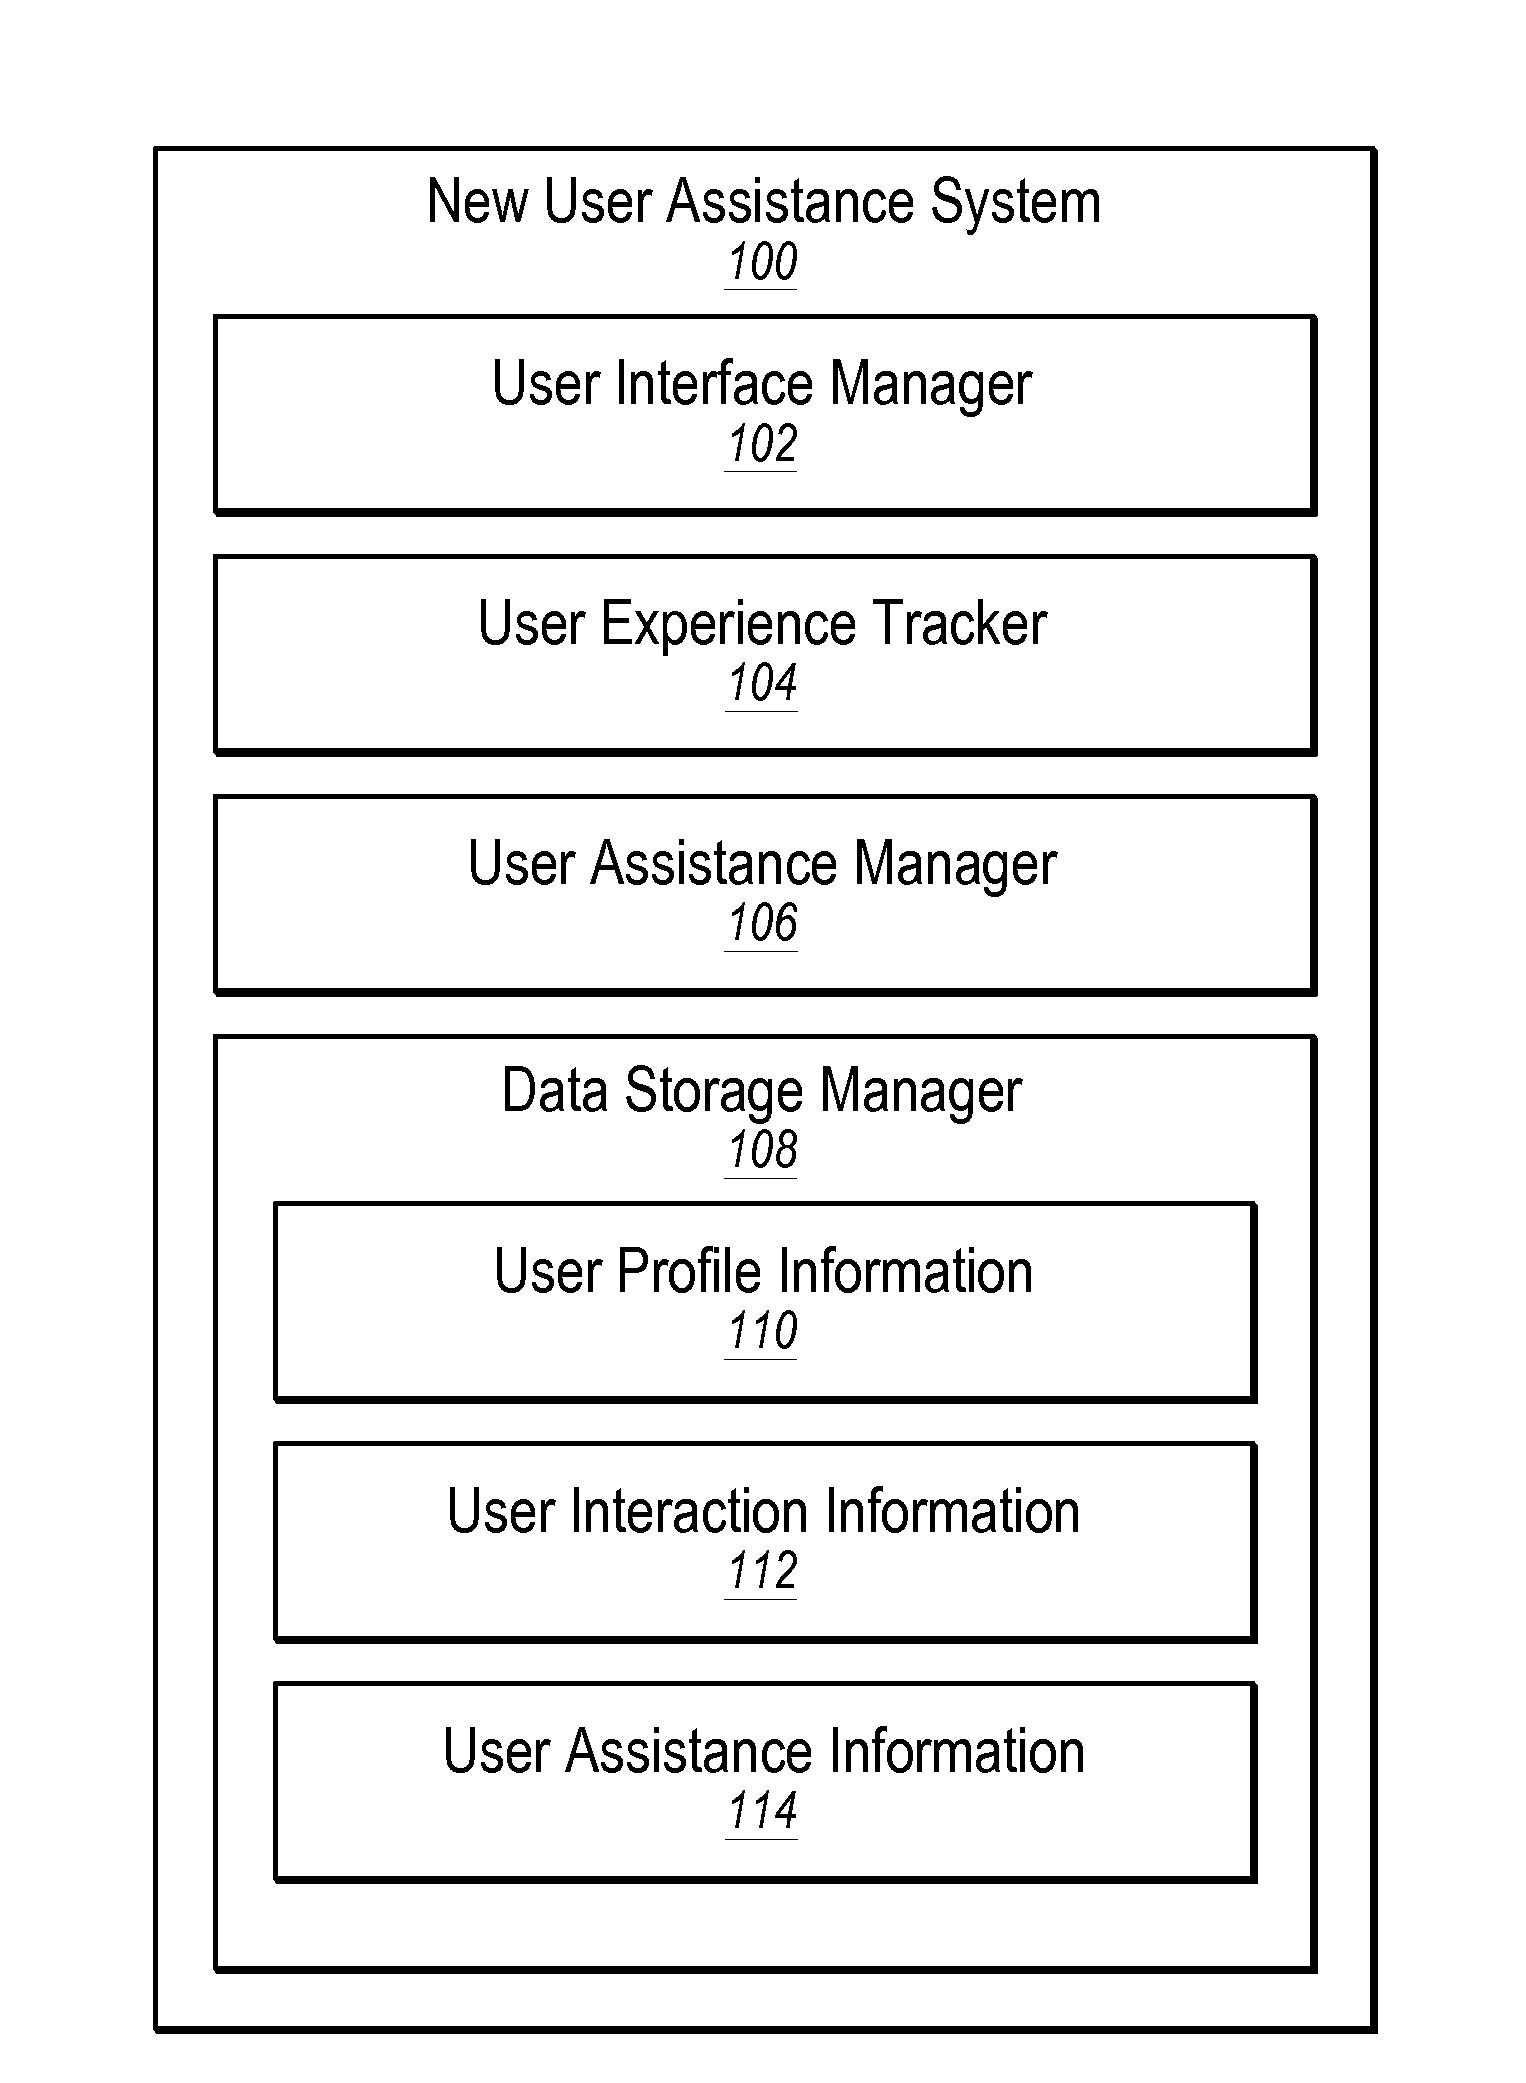 Assisting a user of a software application